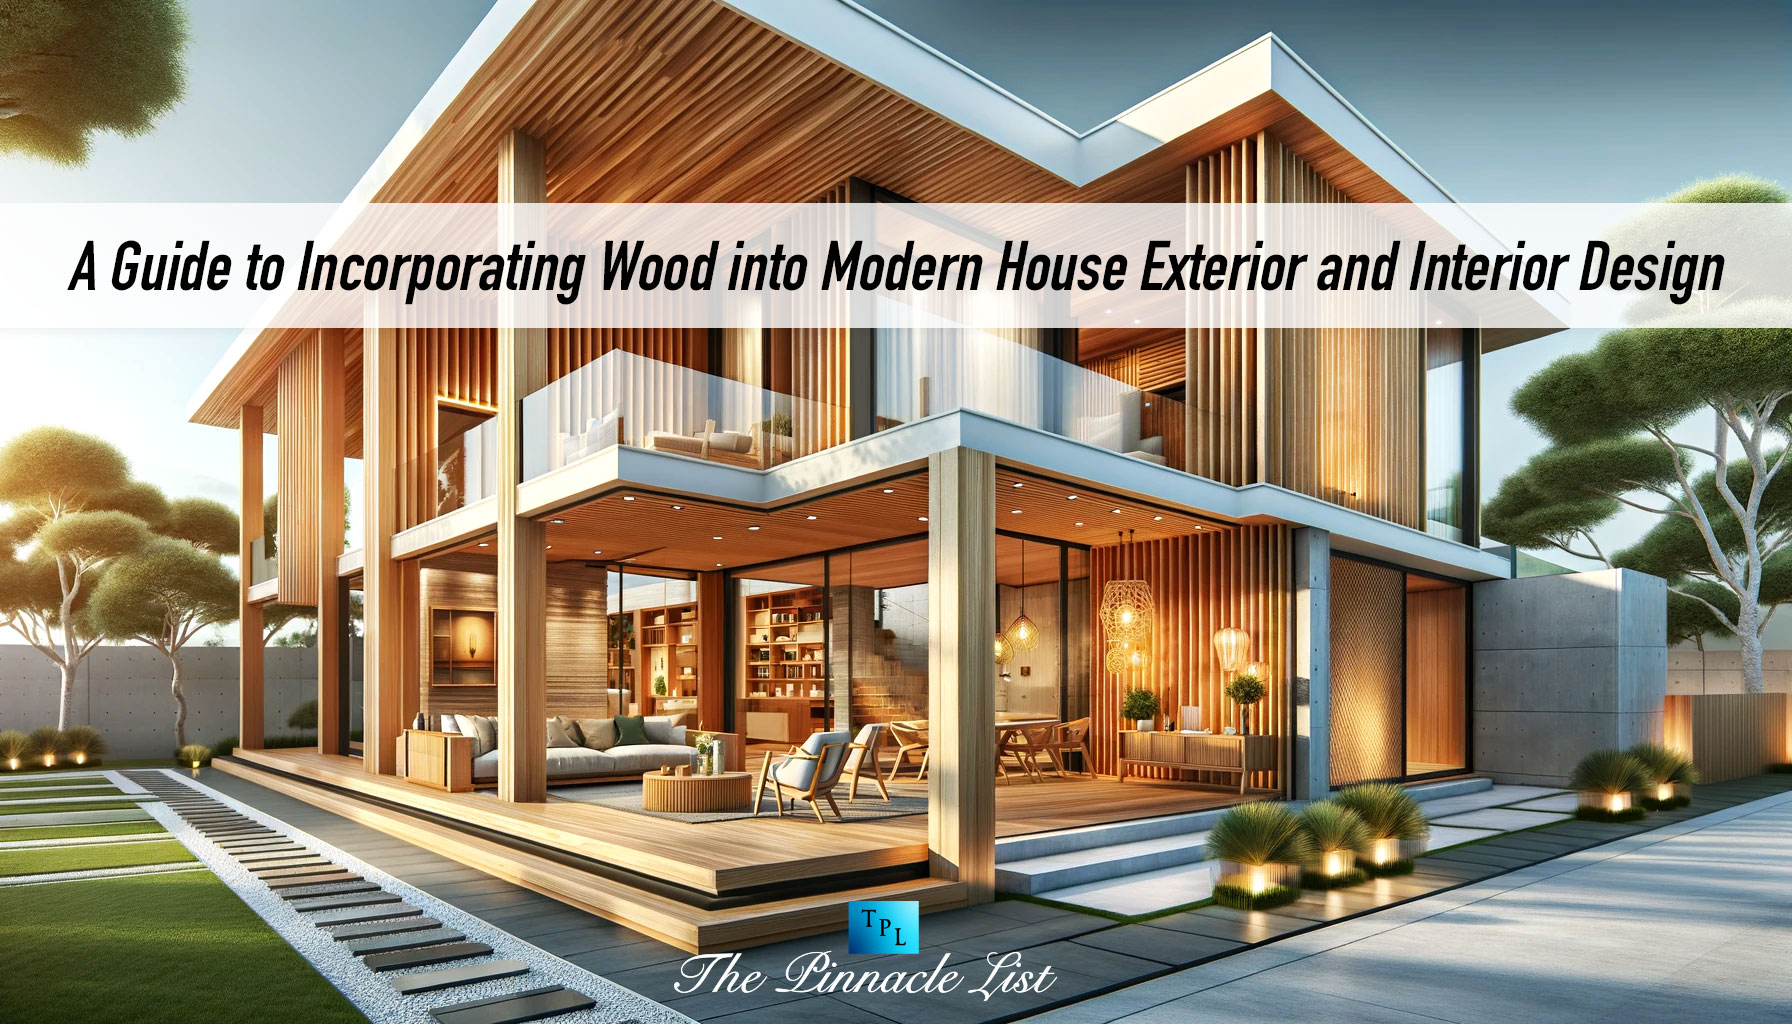 A Guide to Incorporating Wood into Modern House Exterior and Interior Design